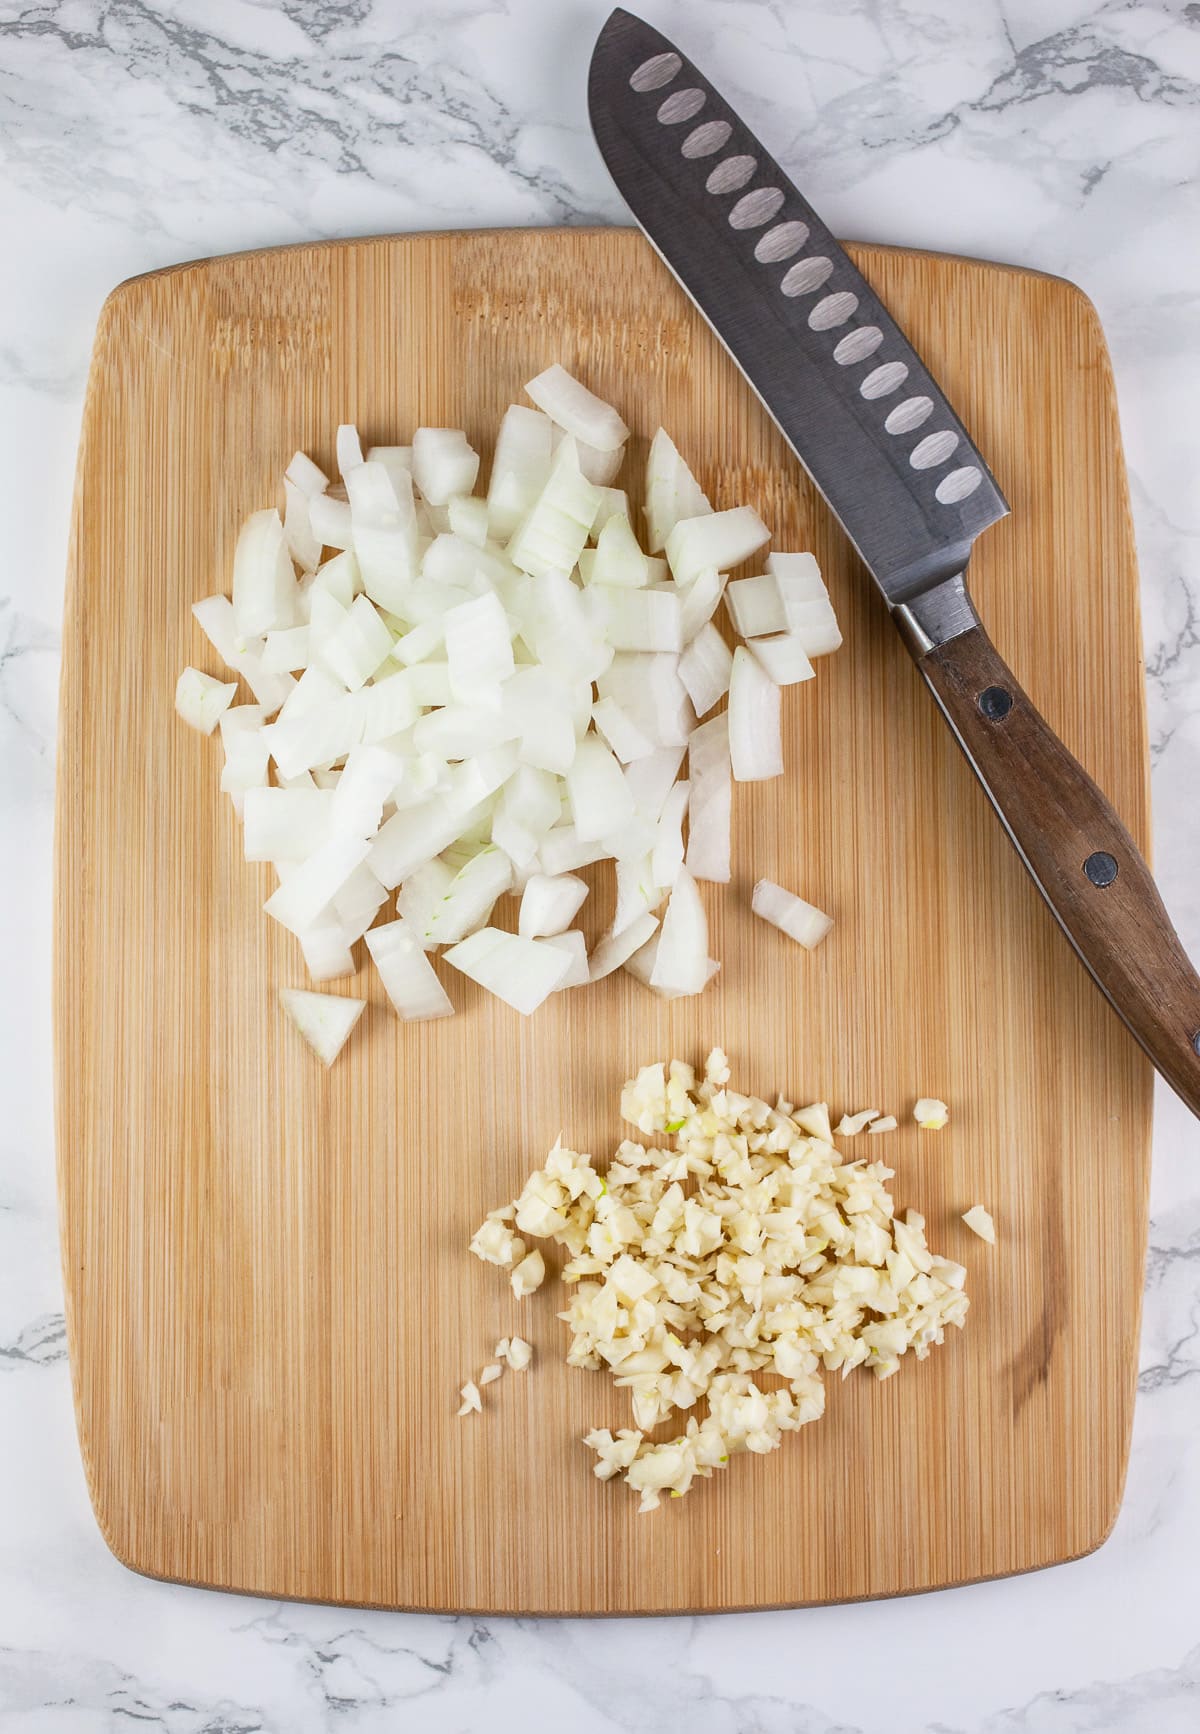 Minced garlic and onions on wooden cutting board with knife.